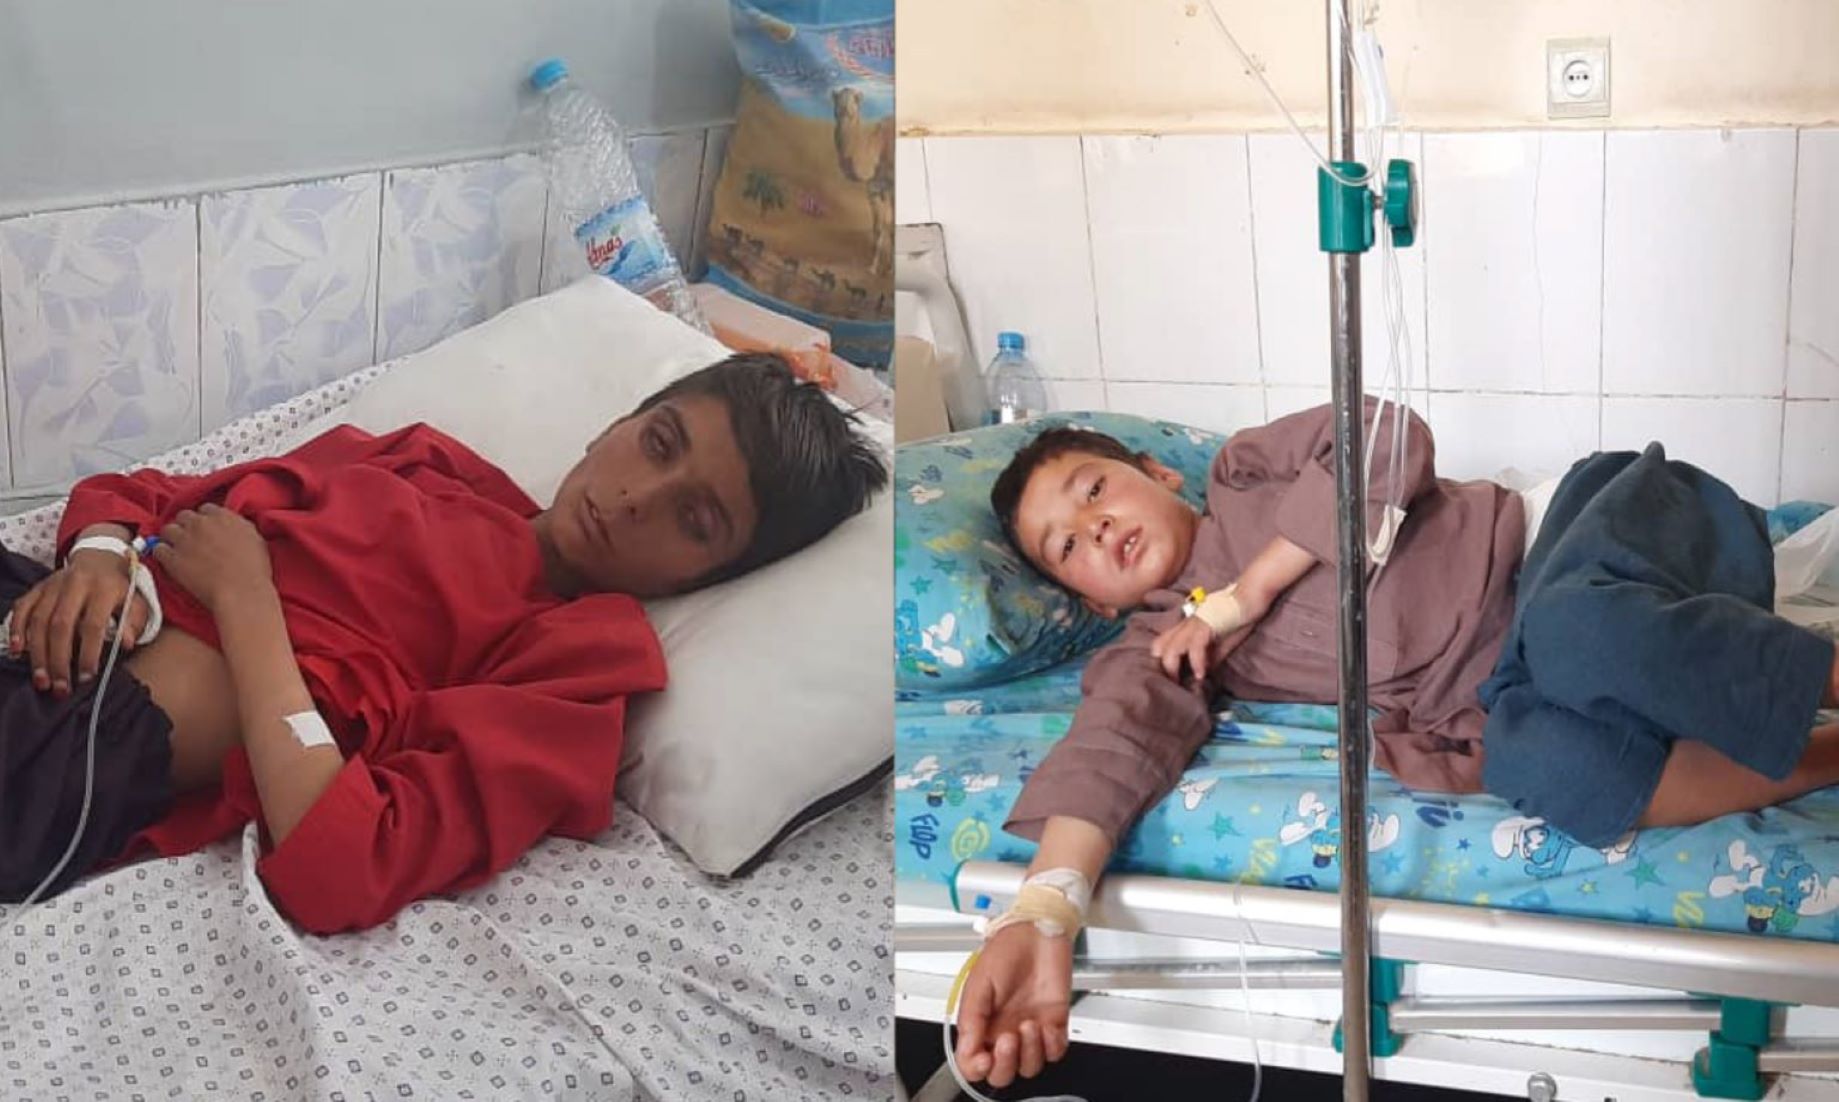 At Least 12 Deaths Reported On Cholera Outbreak In Afghanistan’s Jawzjan Province